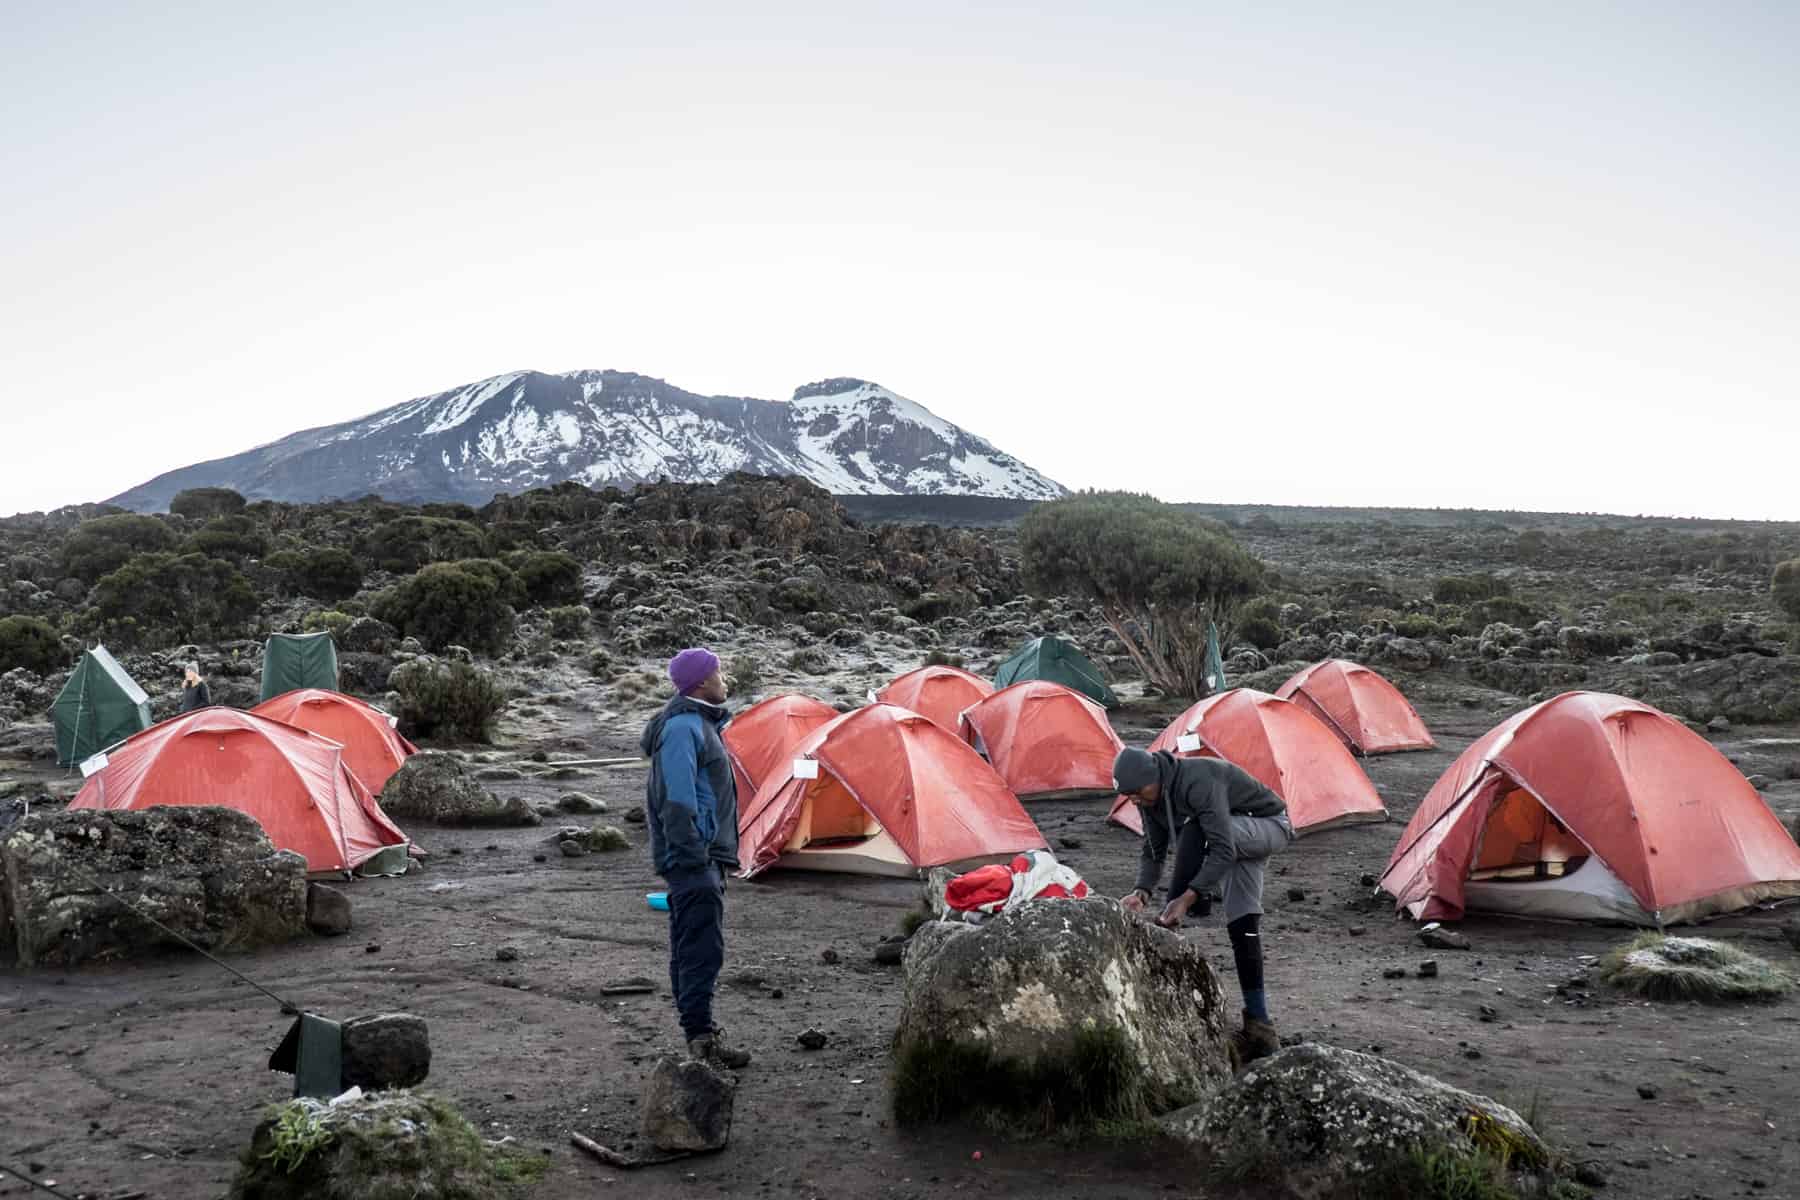 Orange tents set up in rocky landscape and small green bushes at the Kilimanjaro Shira 2 Camp.